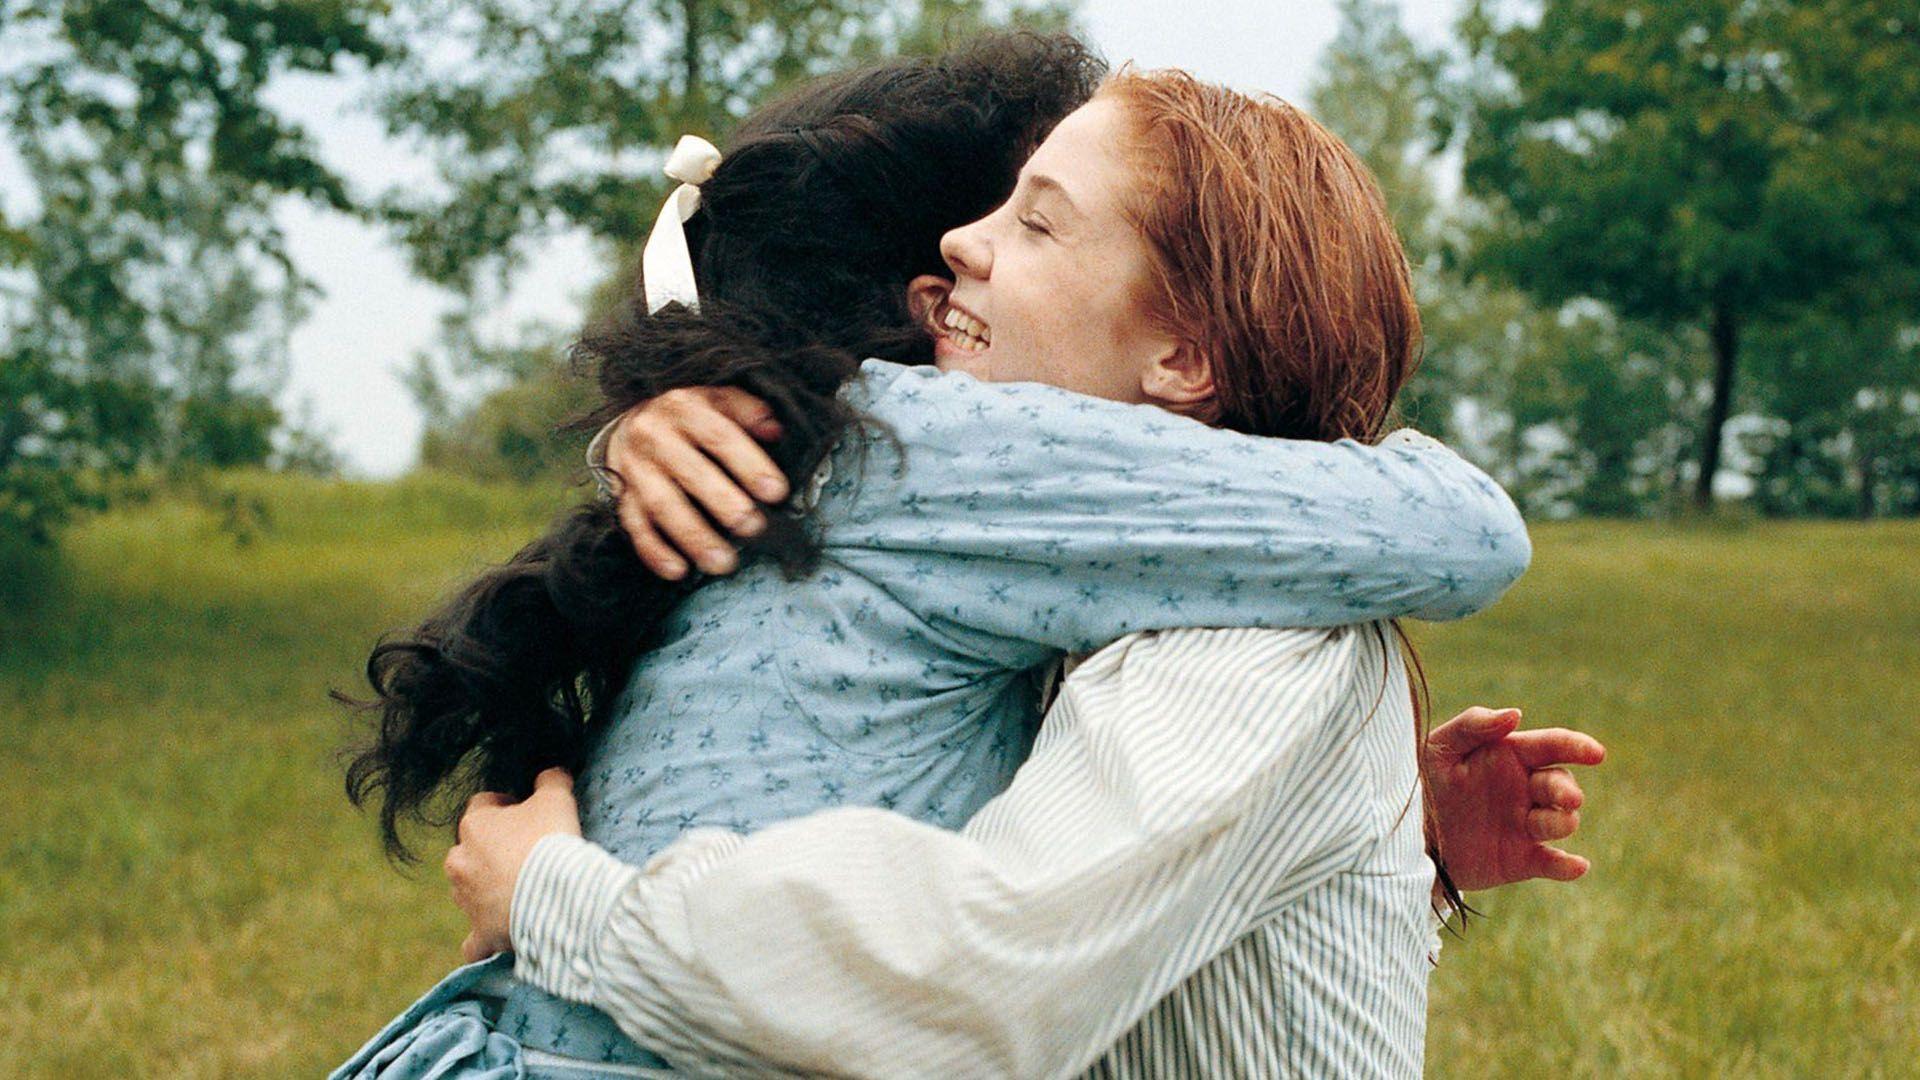 Anne of Green Gables Fanfiction Stories Based on the Beloved Series